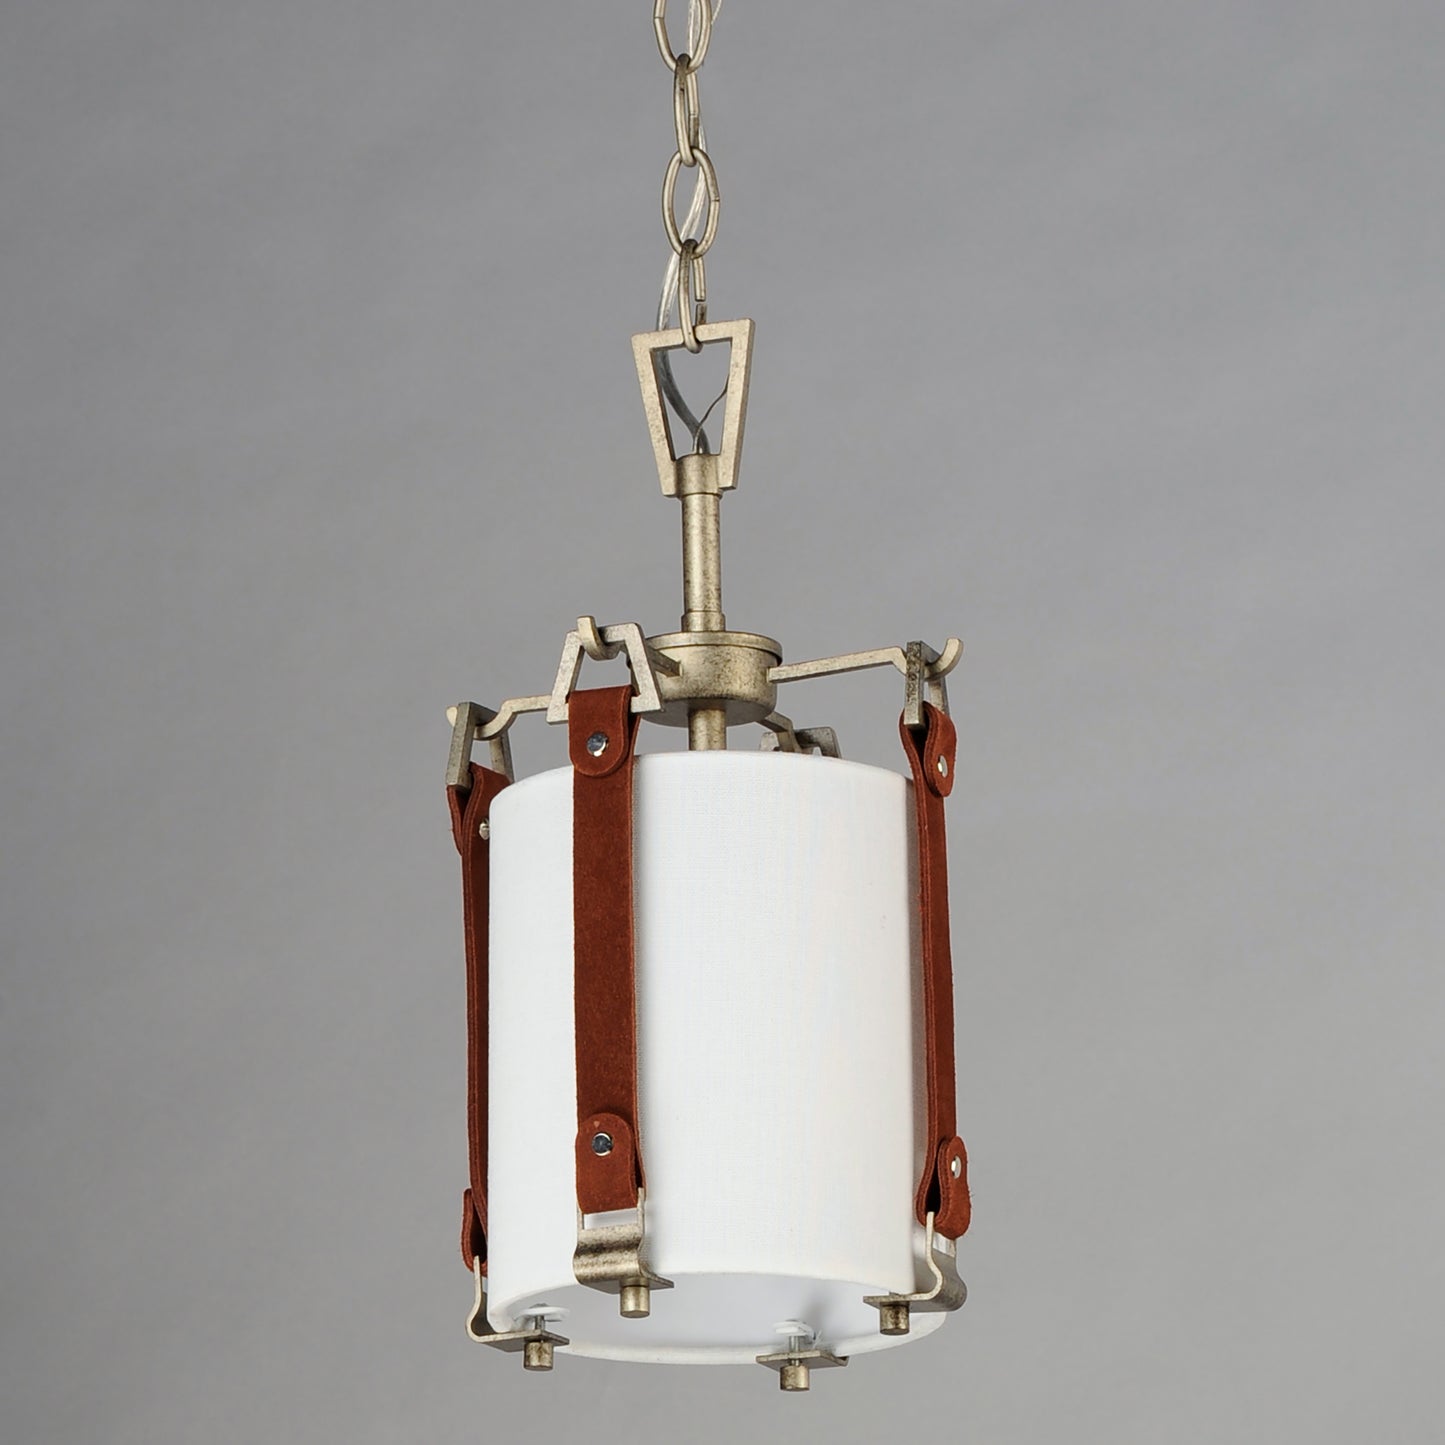 16132FTWZBSD - 1 Light Sausalito 7.5" Pendant - Weathered Zinc / Brown Suede